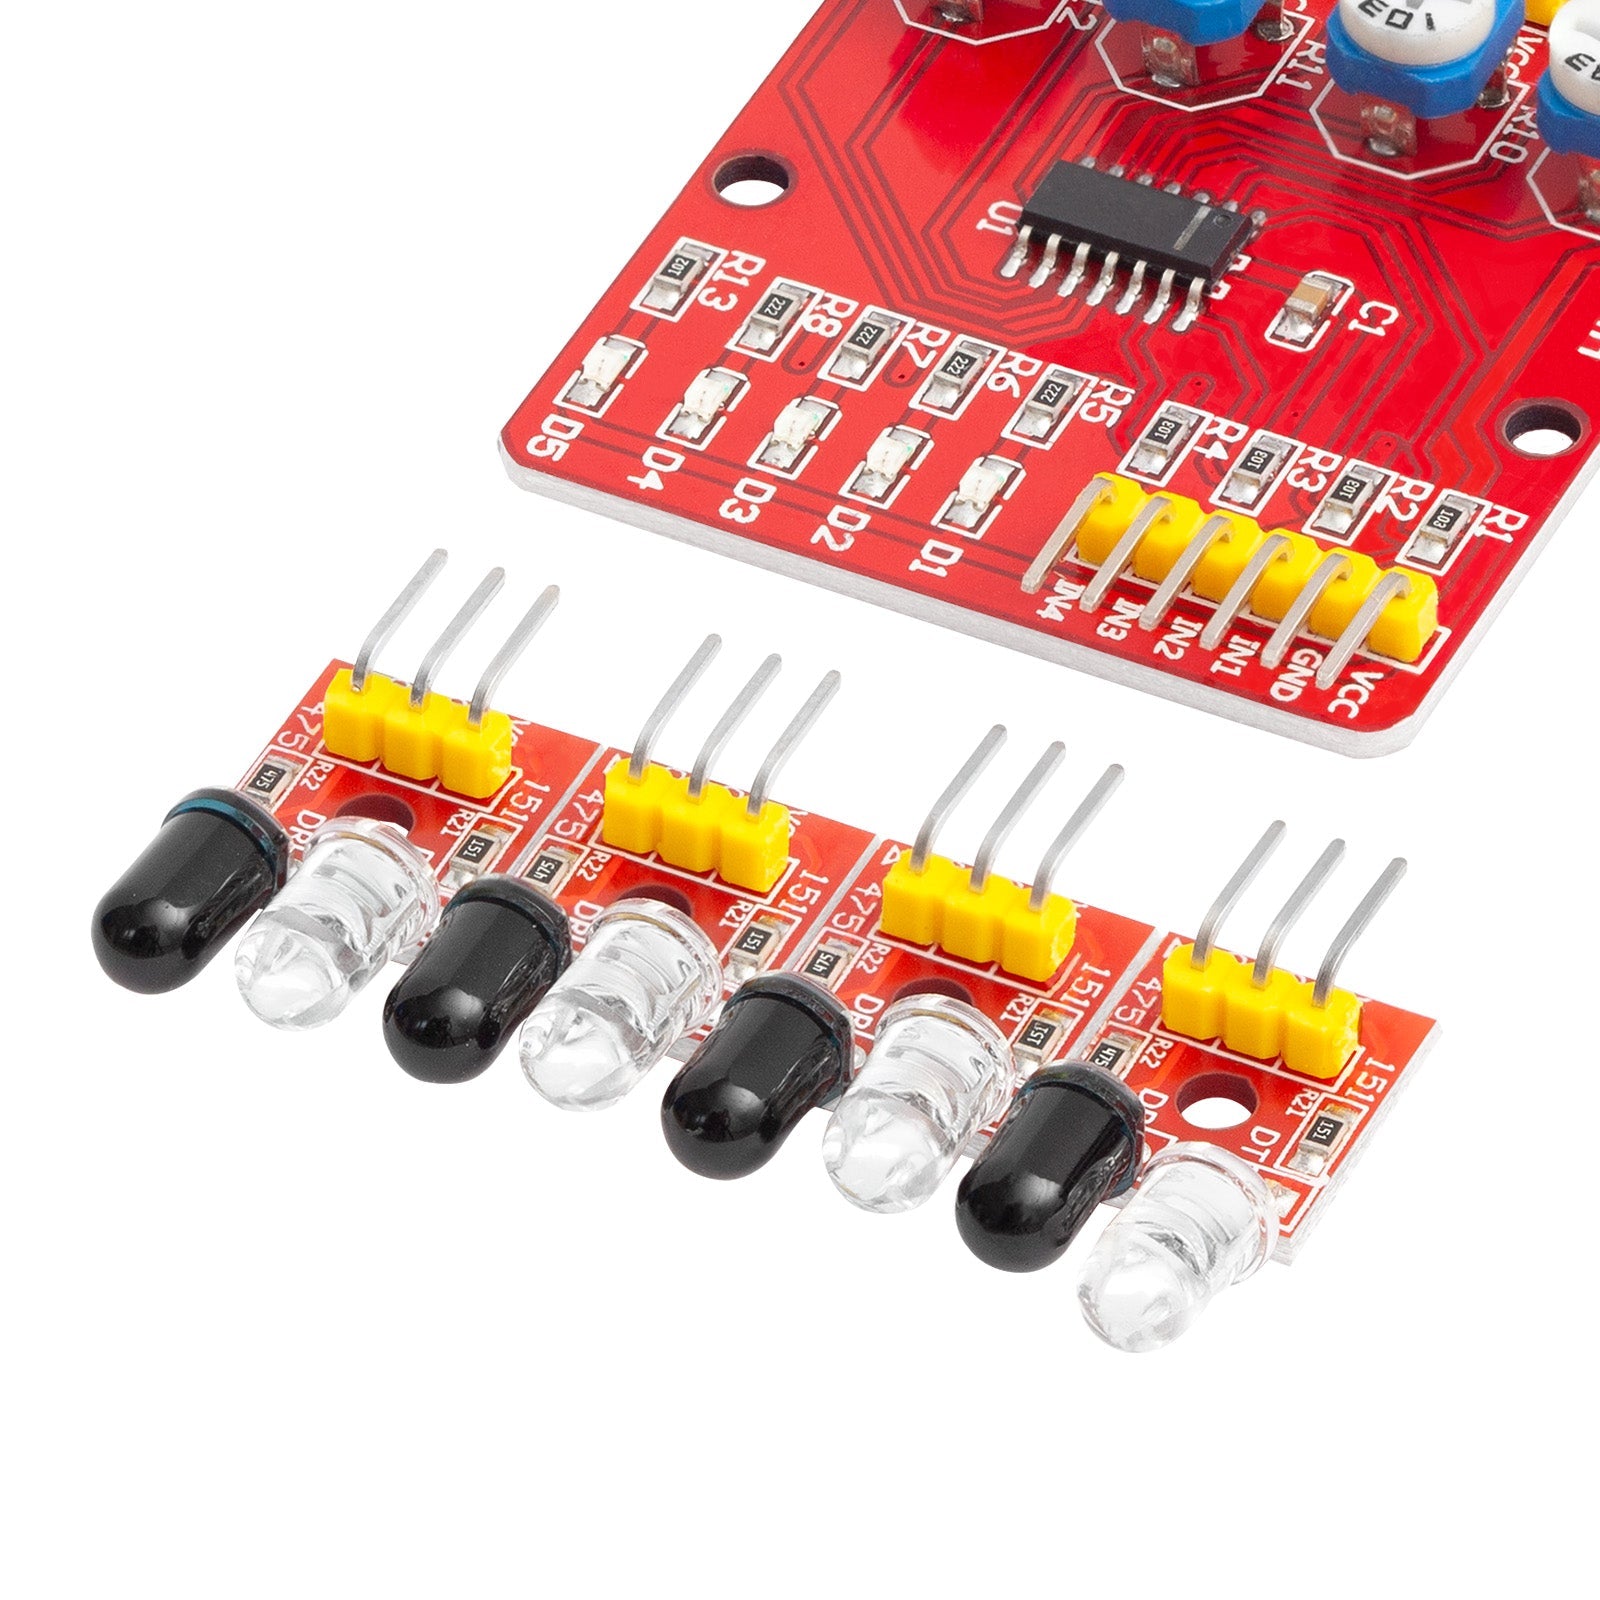 4-channel infrared lines reflection Tracking-smart sensor module set Smart distance detector CI module with auto obstruction prevention and obstacle avoidance PCB